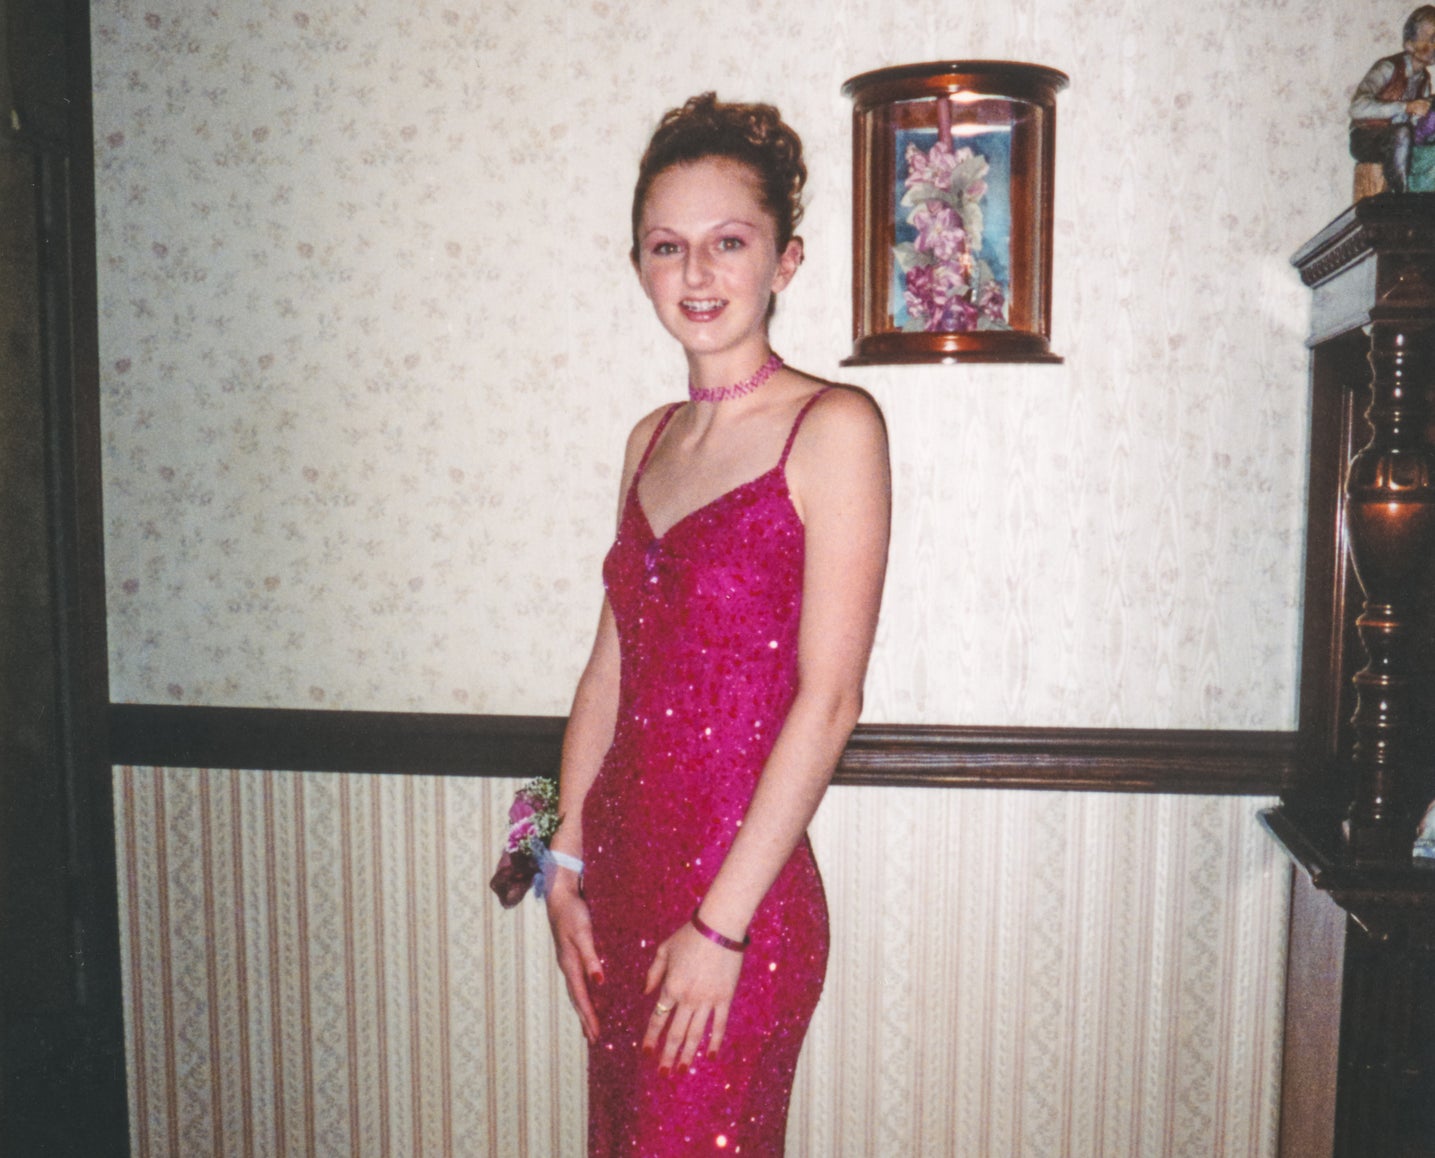 Woman in a sparkly, sleeveless dress with a corsage, standing in a room with vintage decor